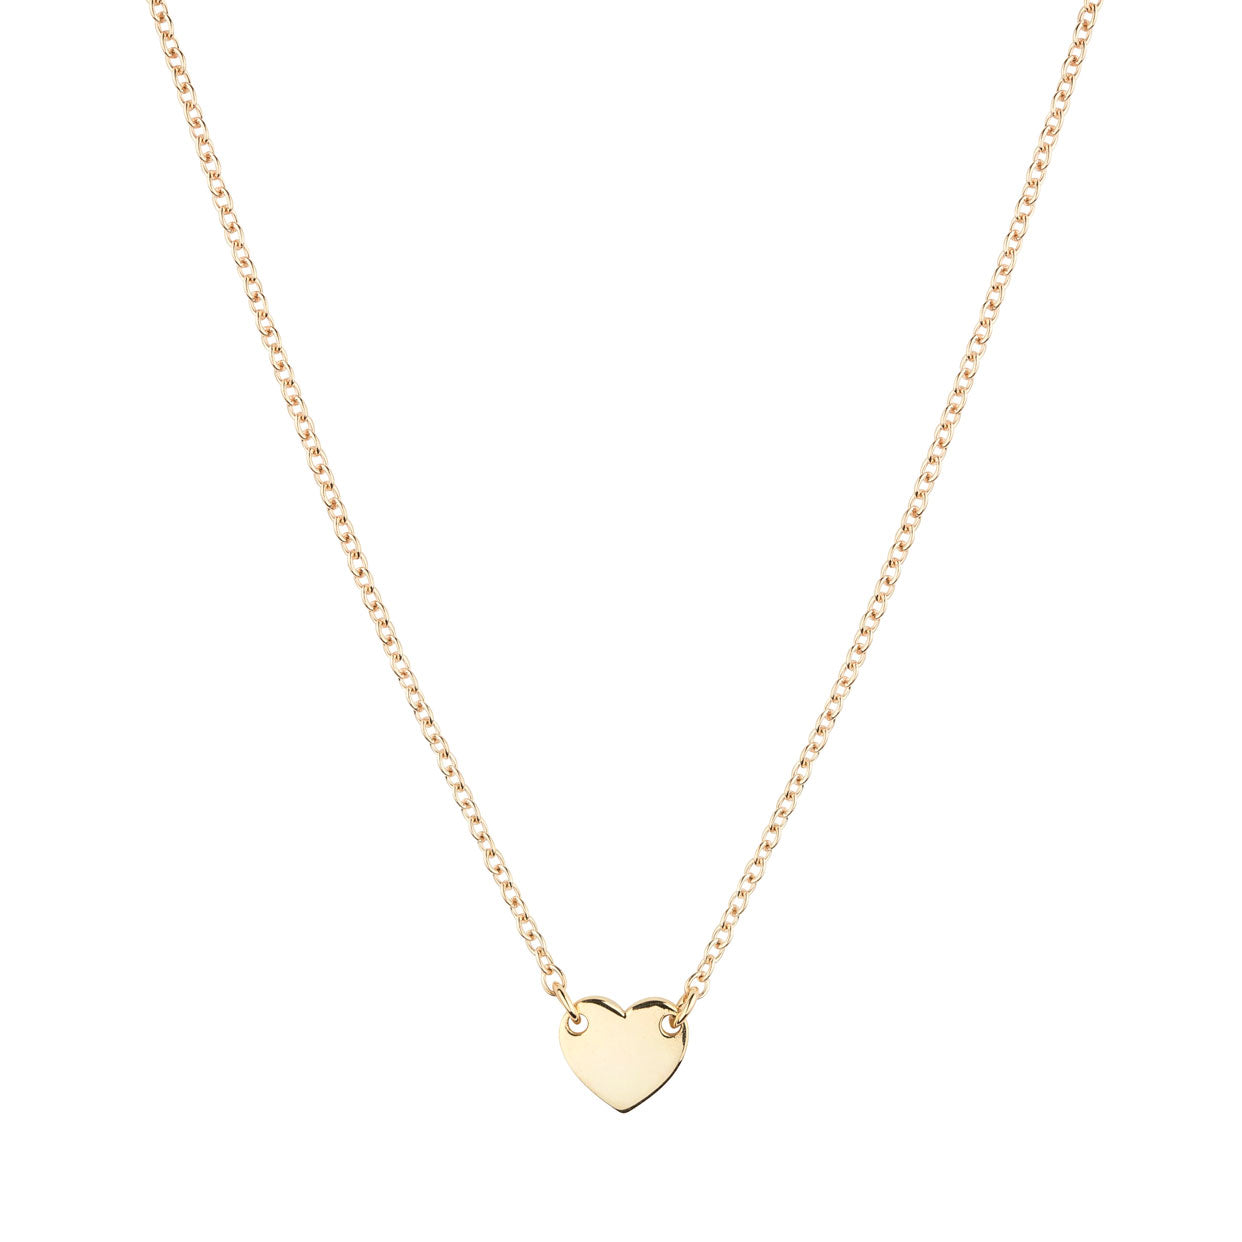 9k gold heart necklace